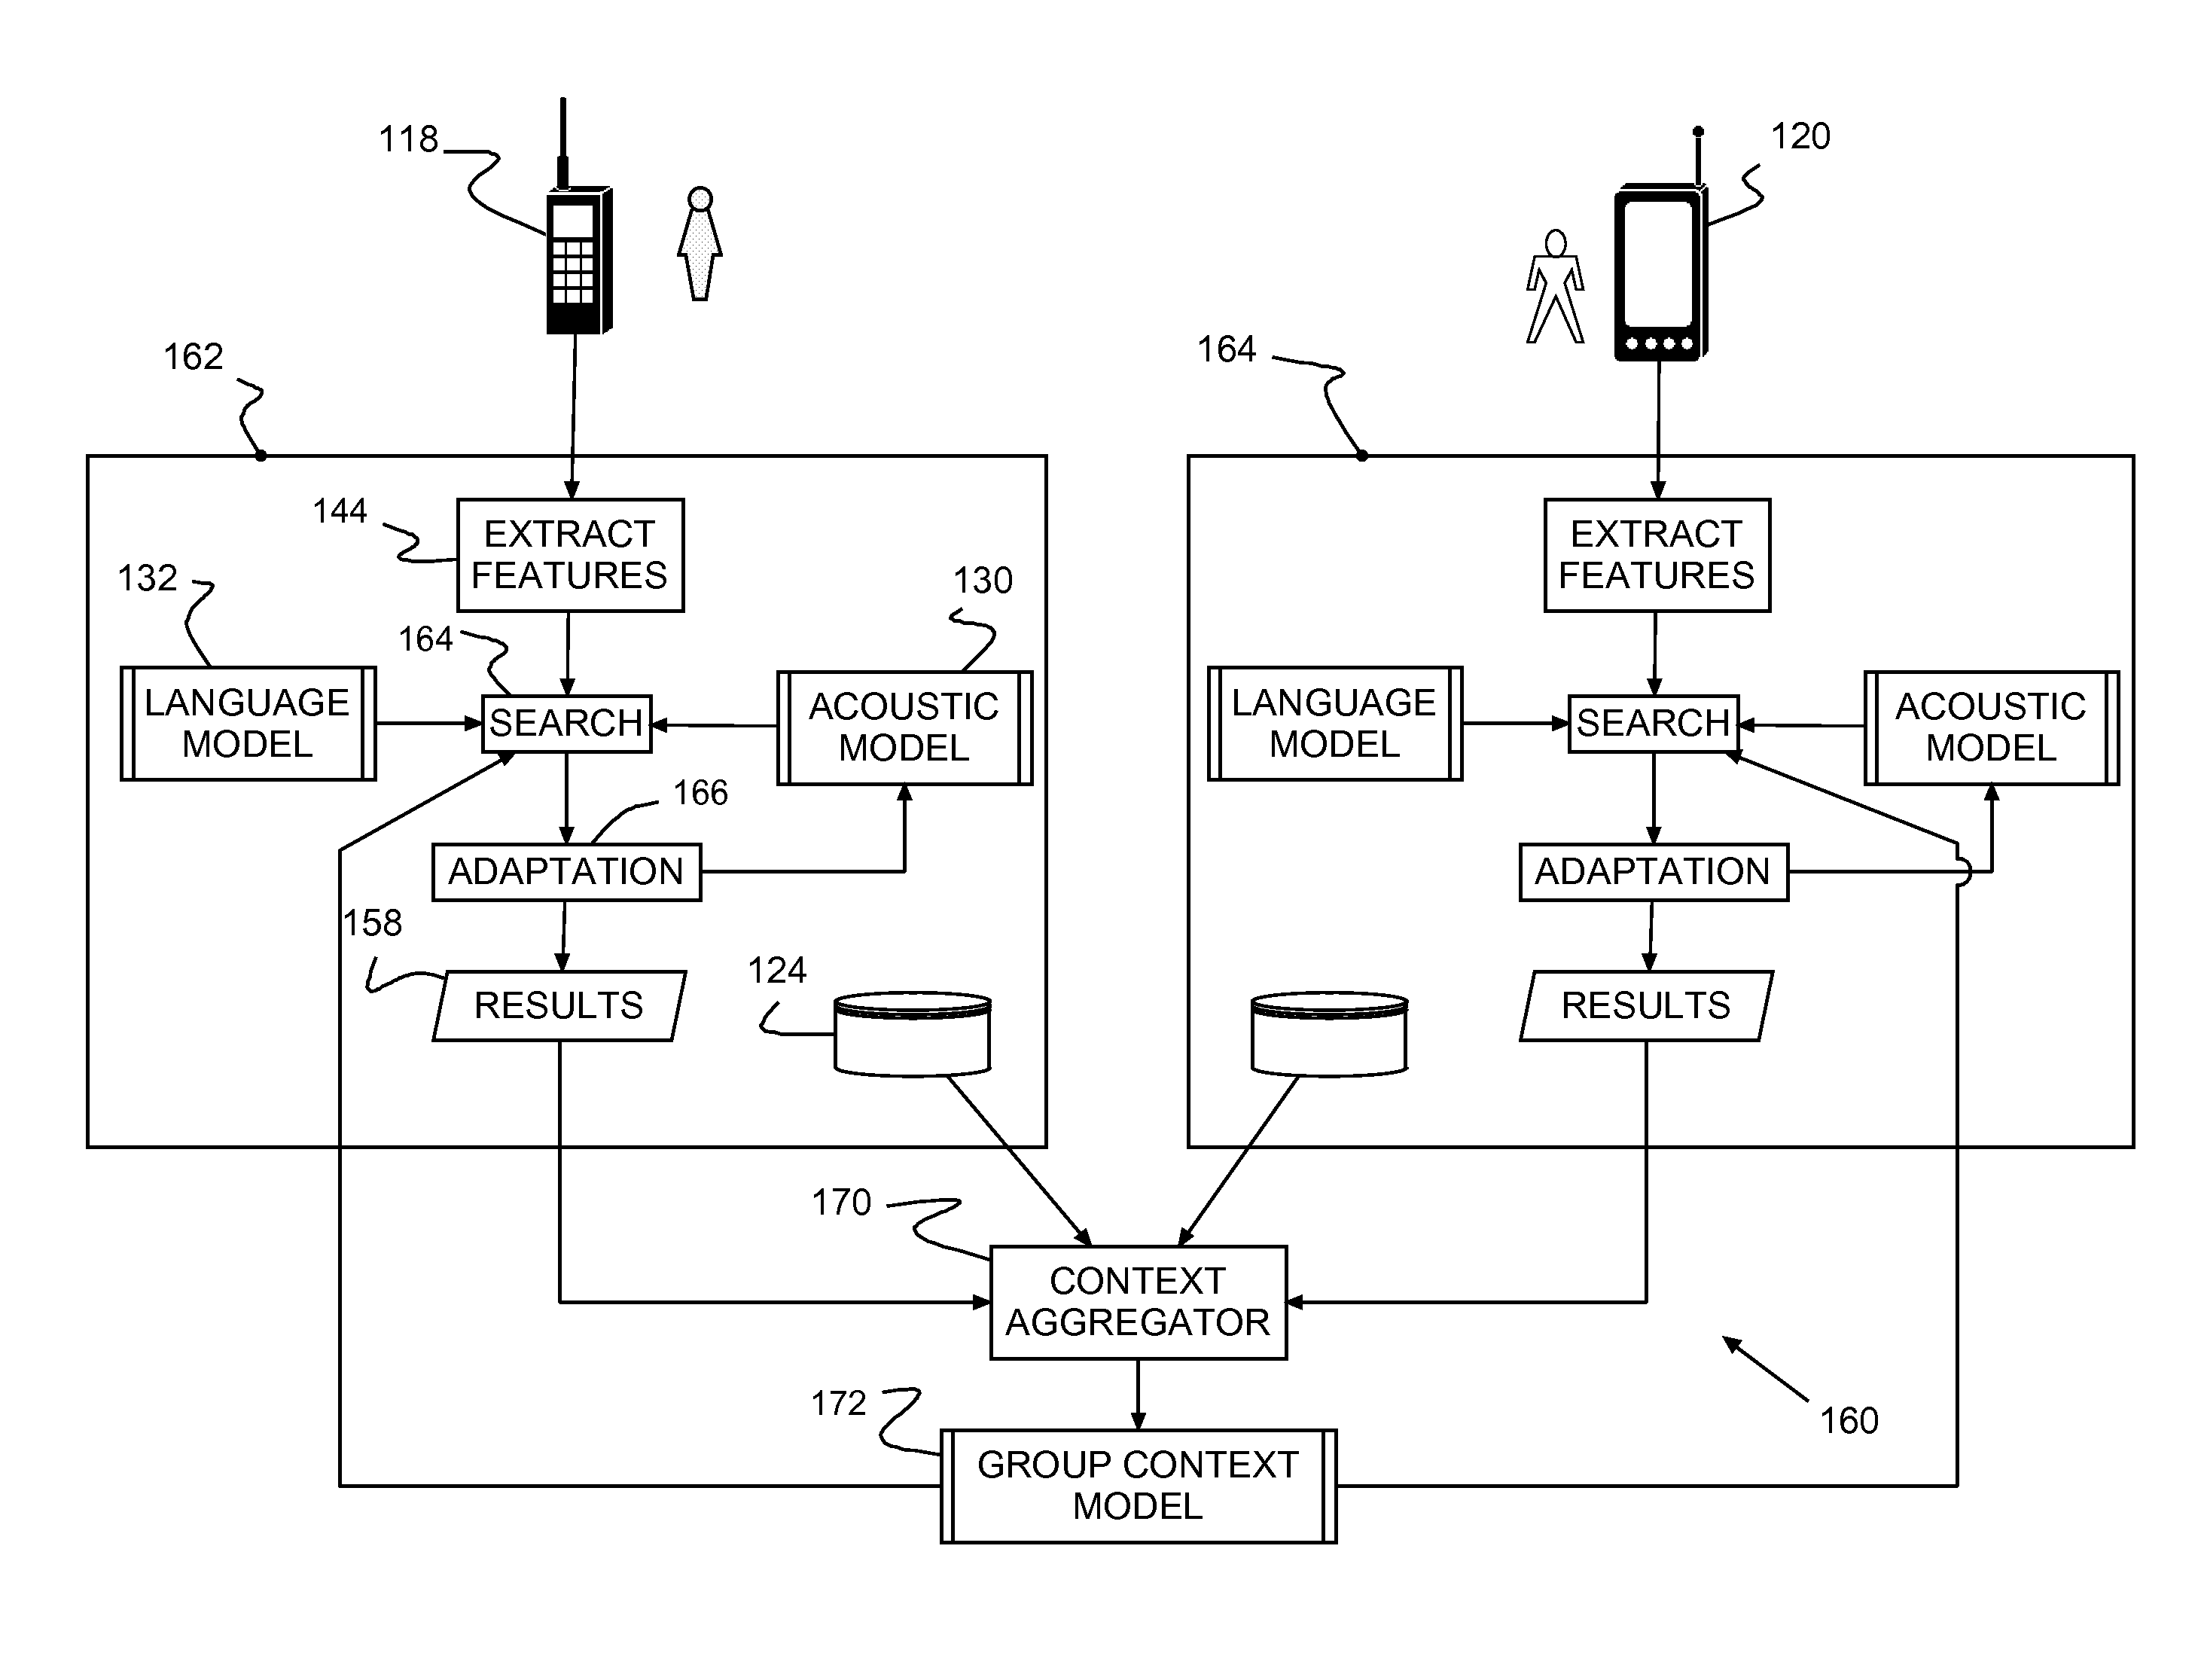 System, method and program product for providing automatic speech recognition (ASR) in a shared resource environment